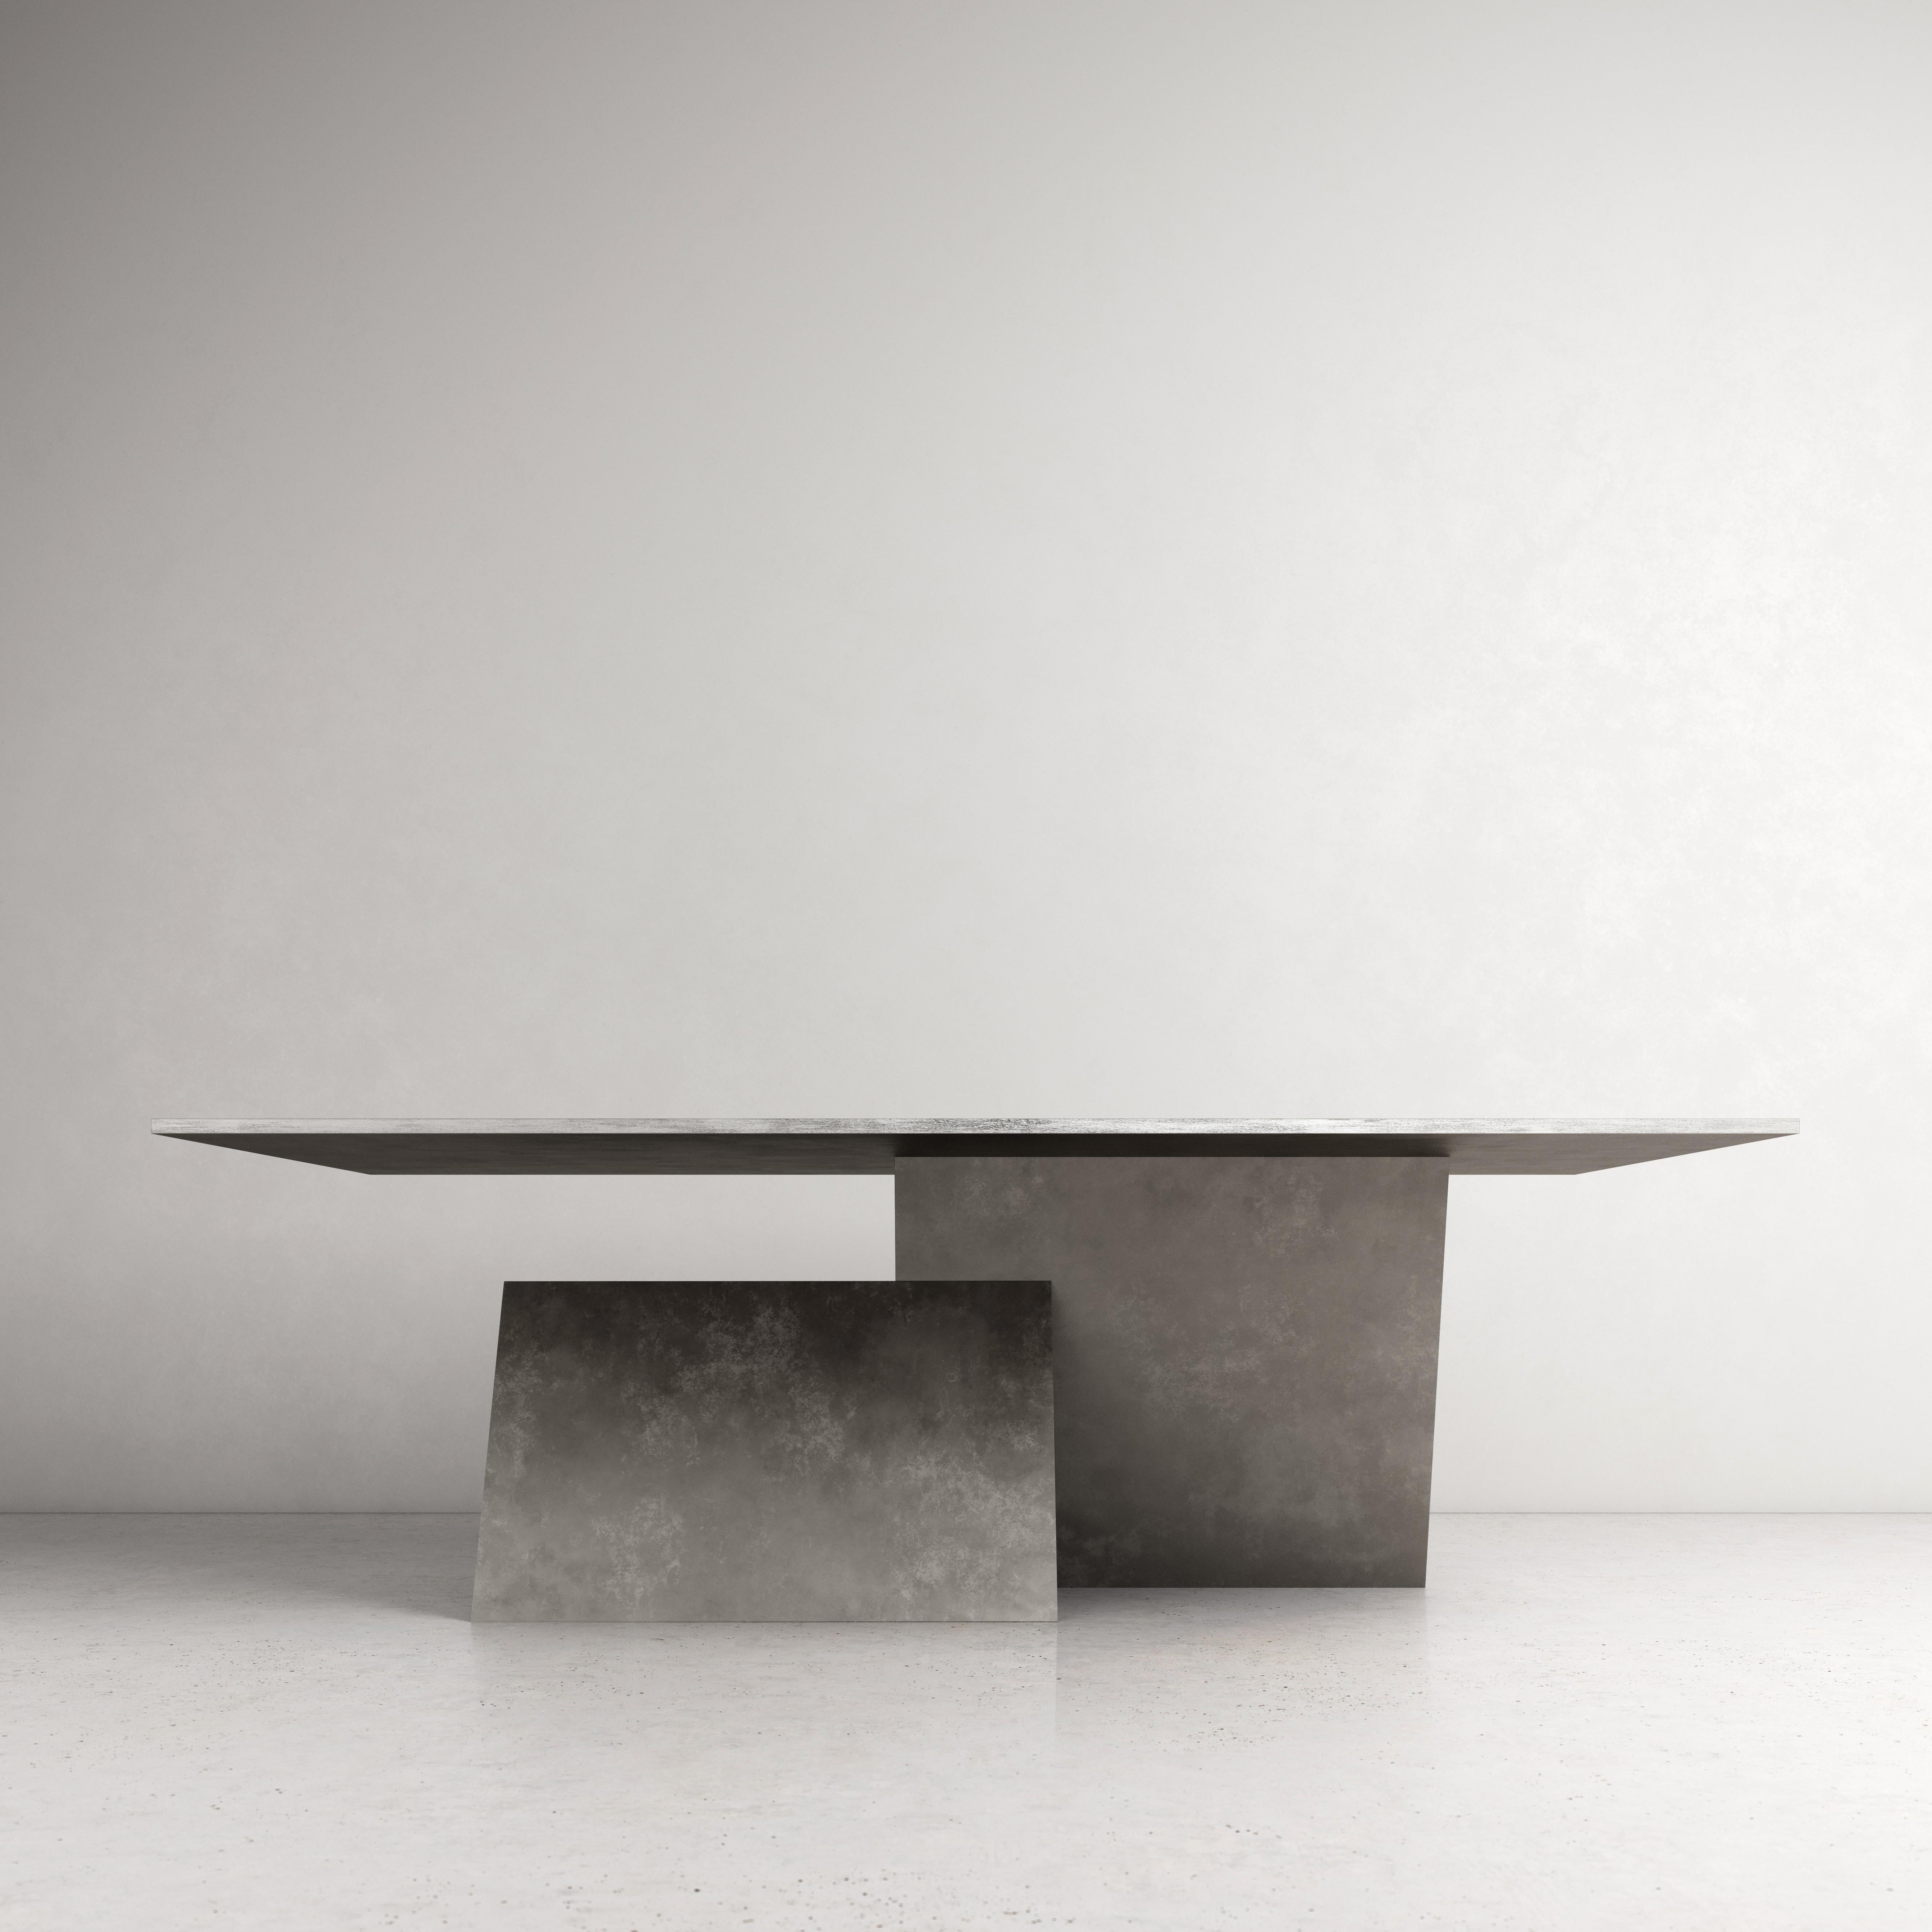 Contemporary table Y by dAM Atelier
Dimensions: L 220 x W 110 x H 73
Materials: Delabrè stainless steel
Also available in verdegris copper

dAM atelier is a duo of young Italian architects sharing the passion for design and architecture, Paolo